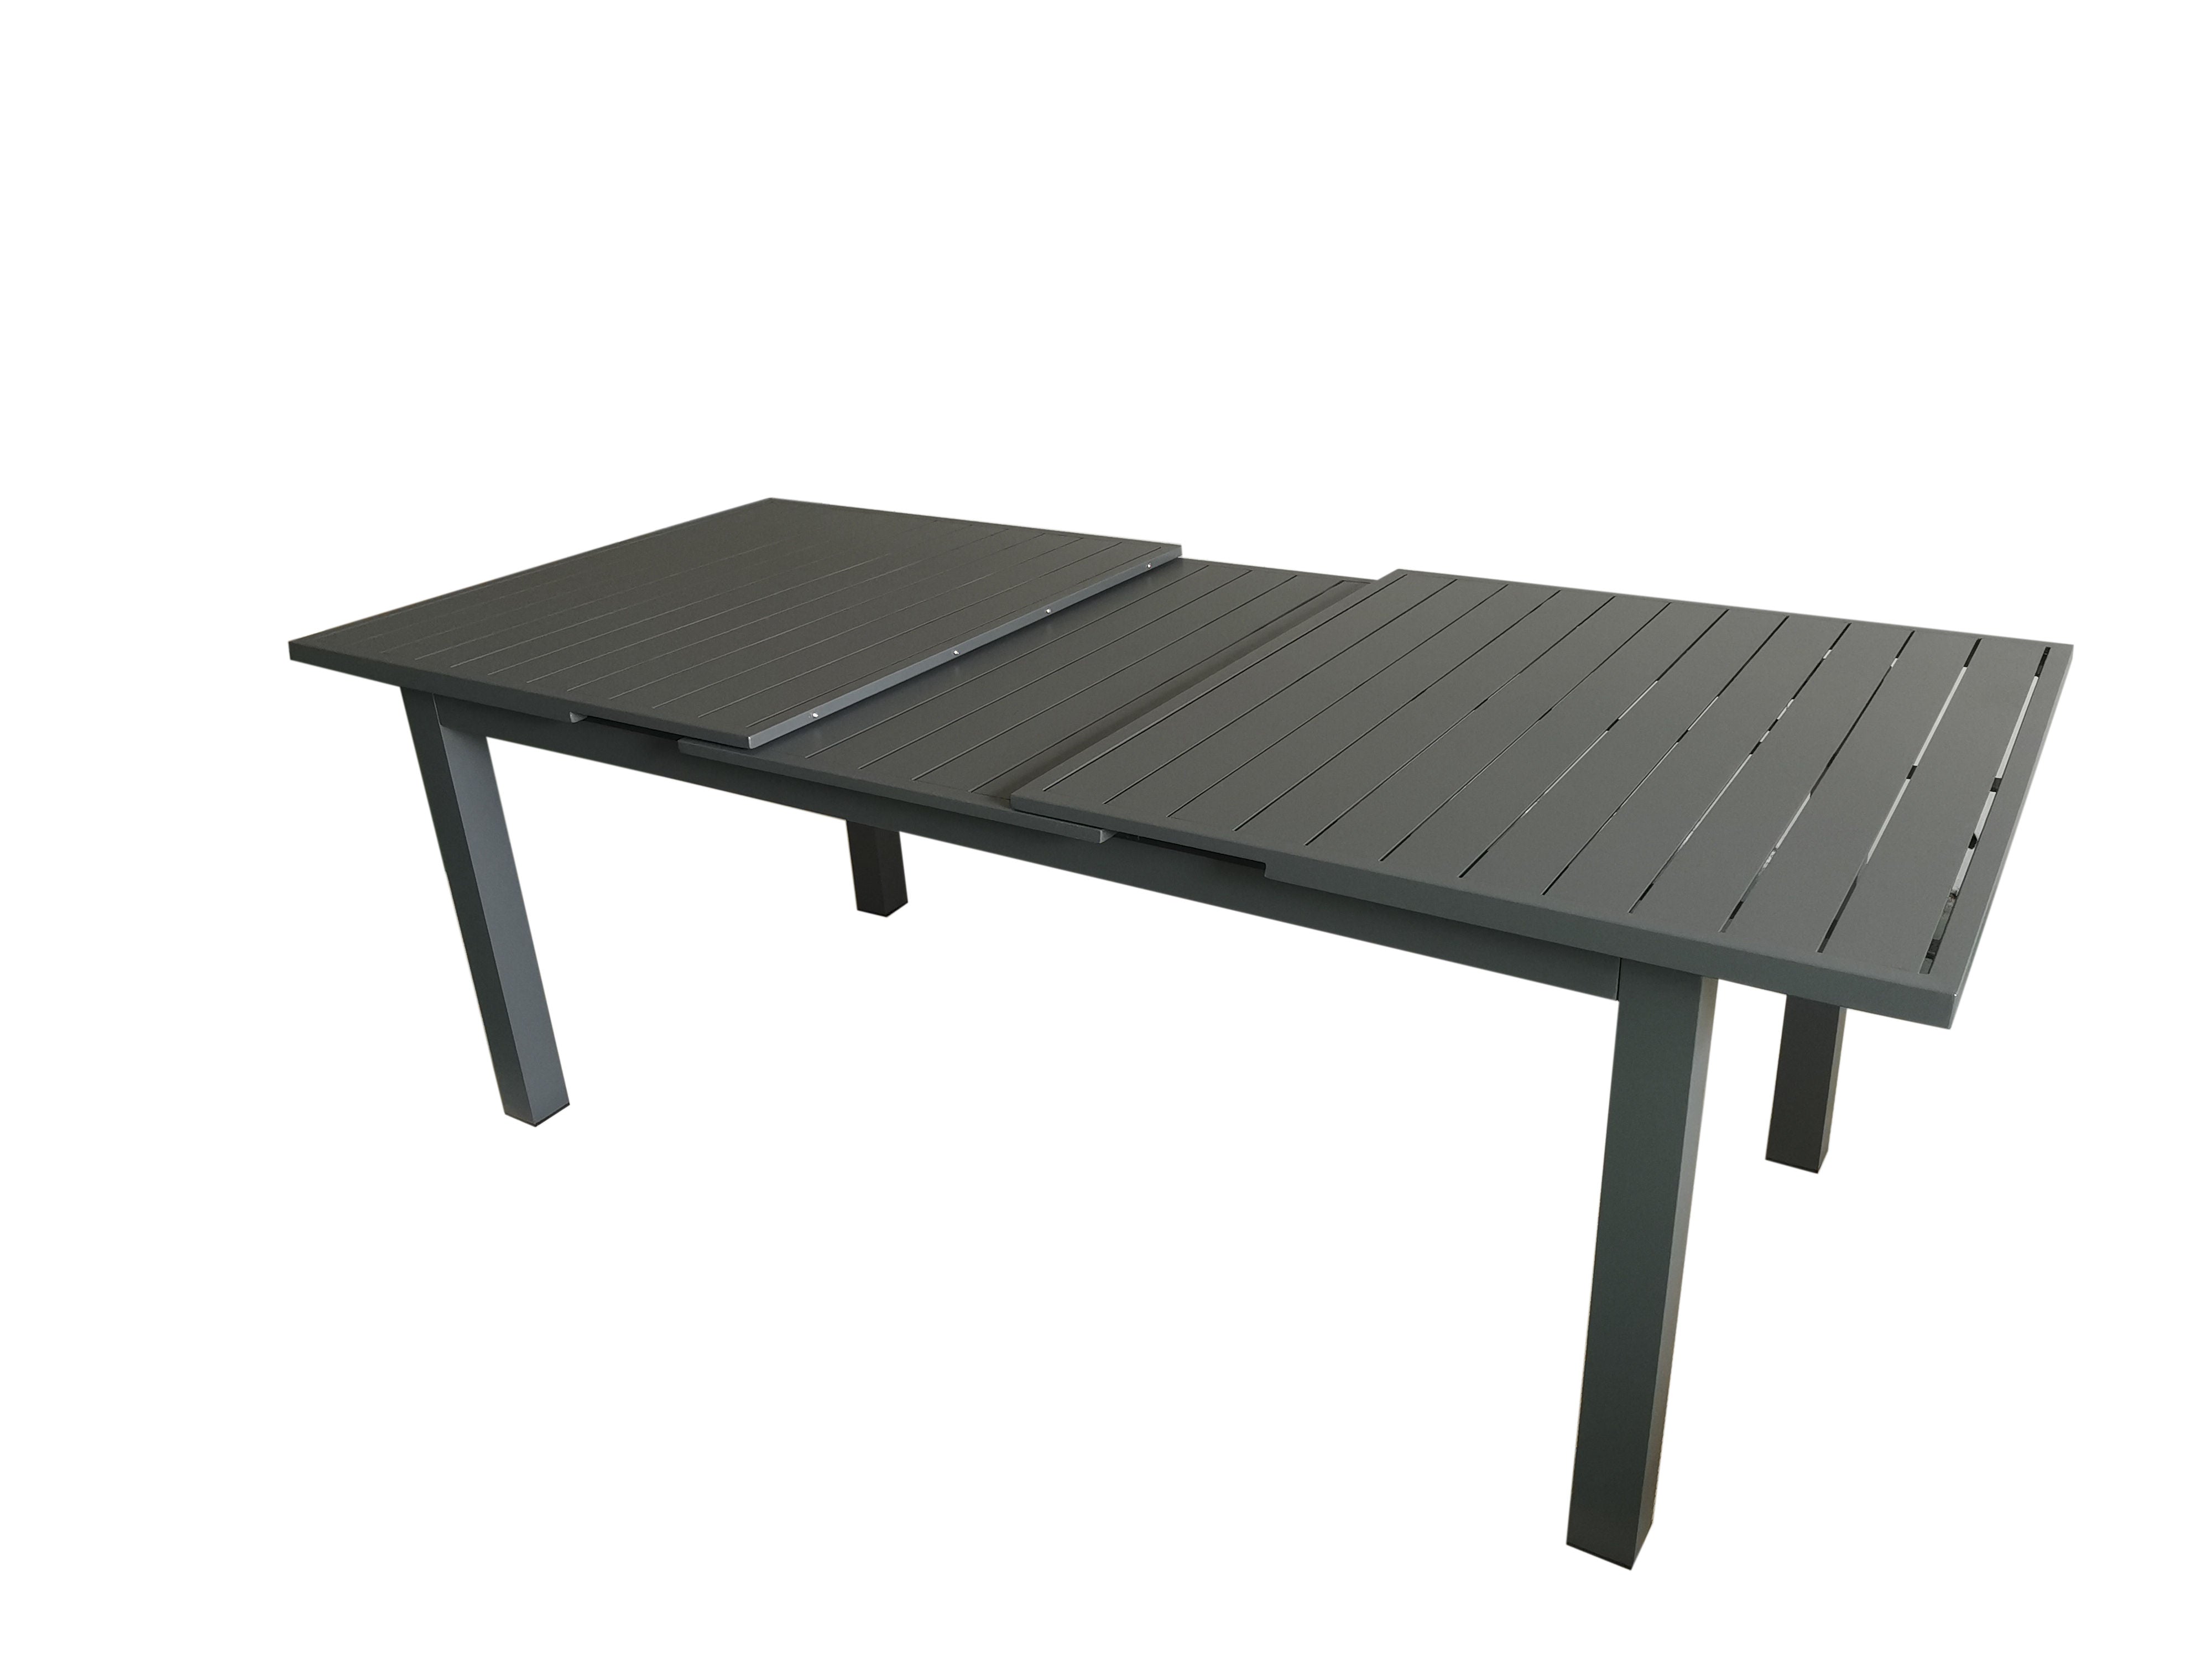 PatioZone Extendable Dining Table with Slated Tabletop (Sliding Mechanism) Aluminum Frame (MOSS-T306C) - Matte Charcoal